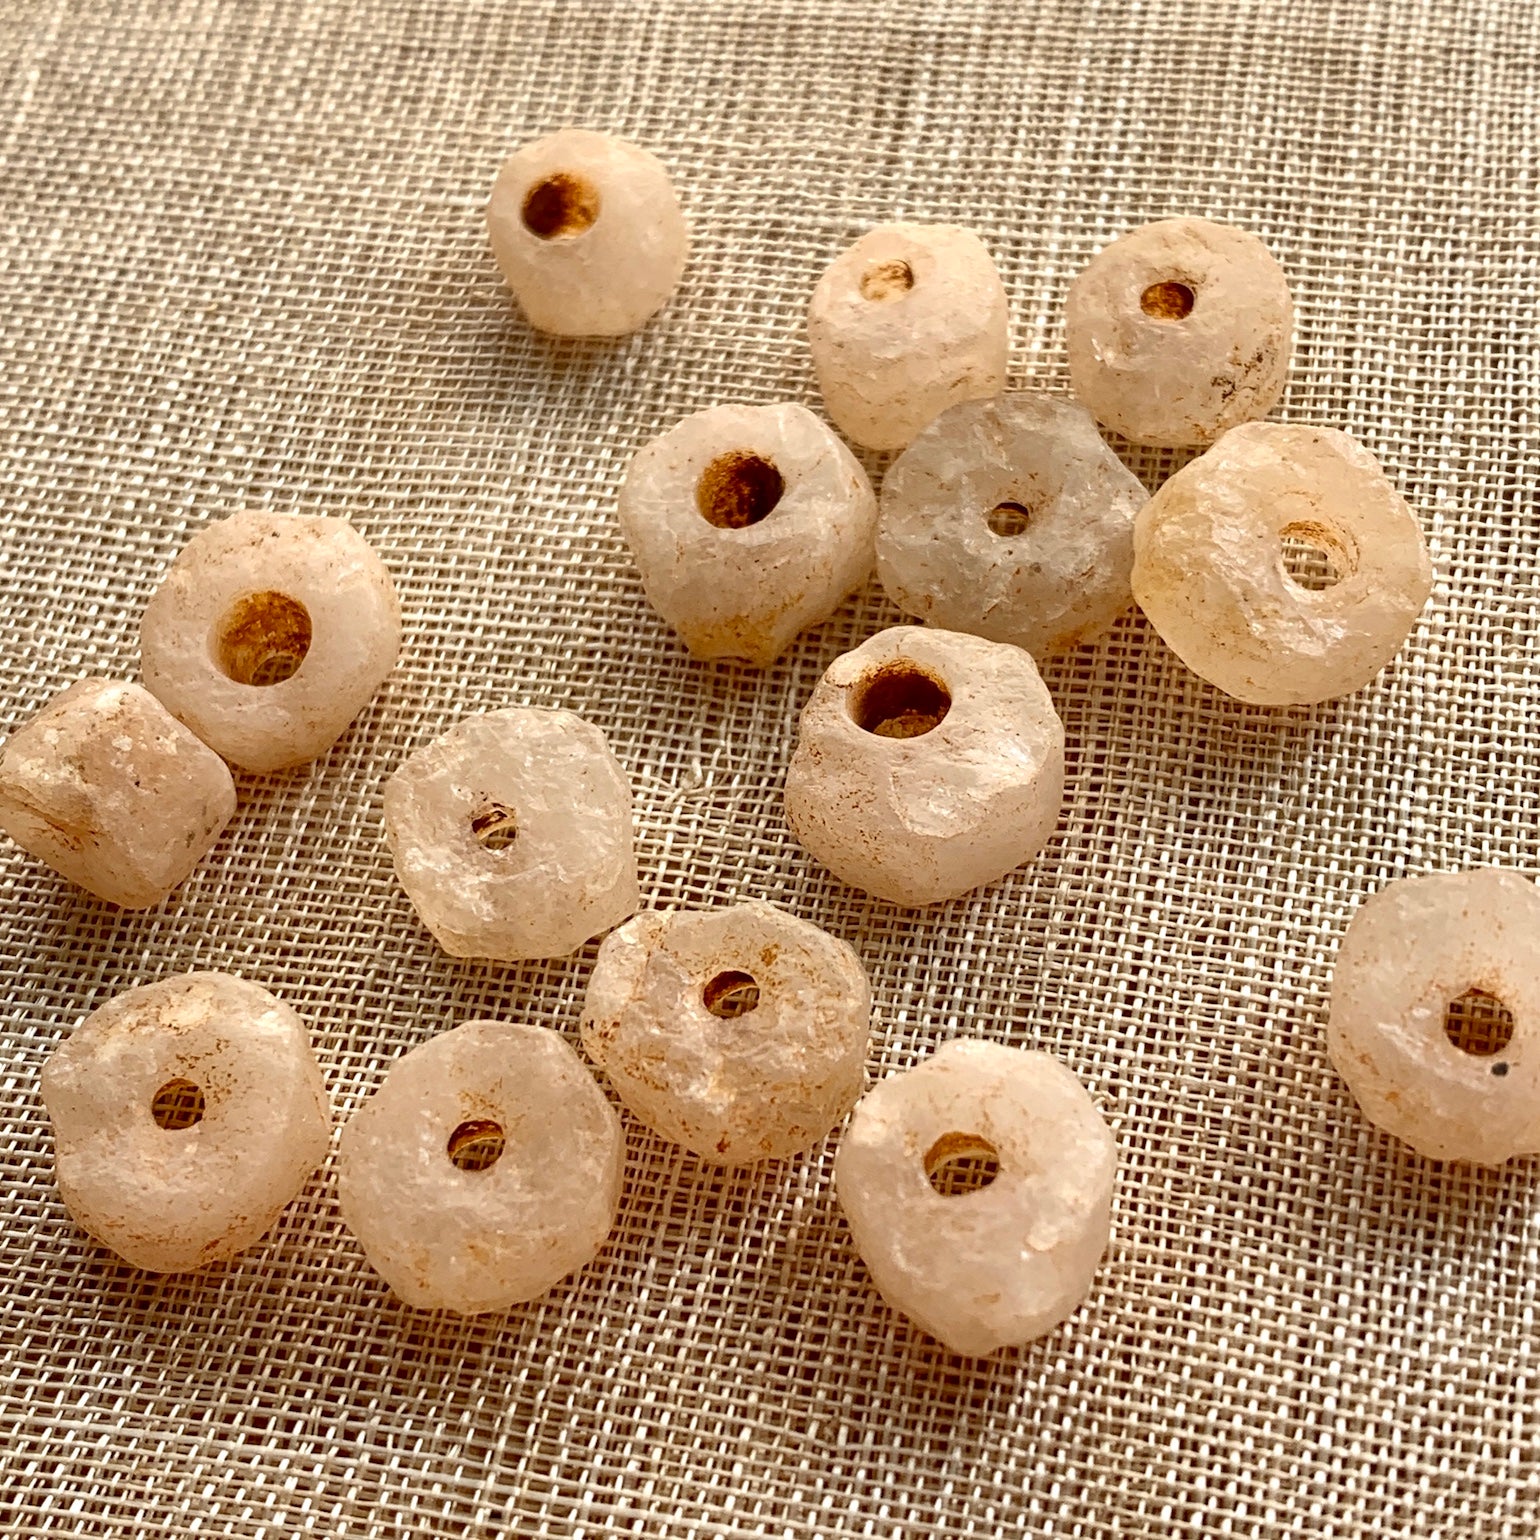 Strand of Ancient Small Bow Drilled Quartz Beads from Mali